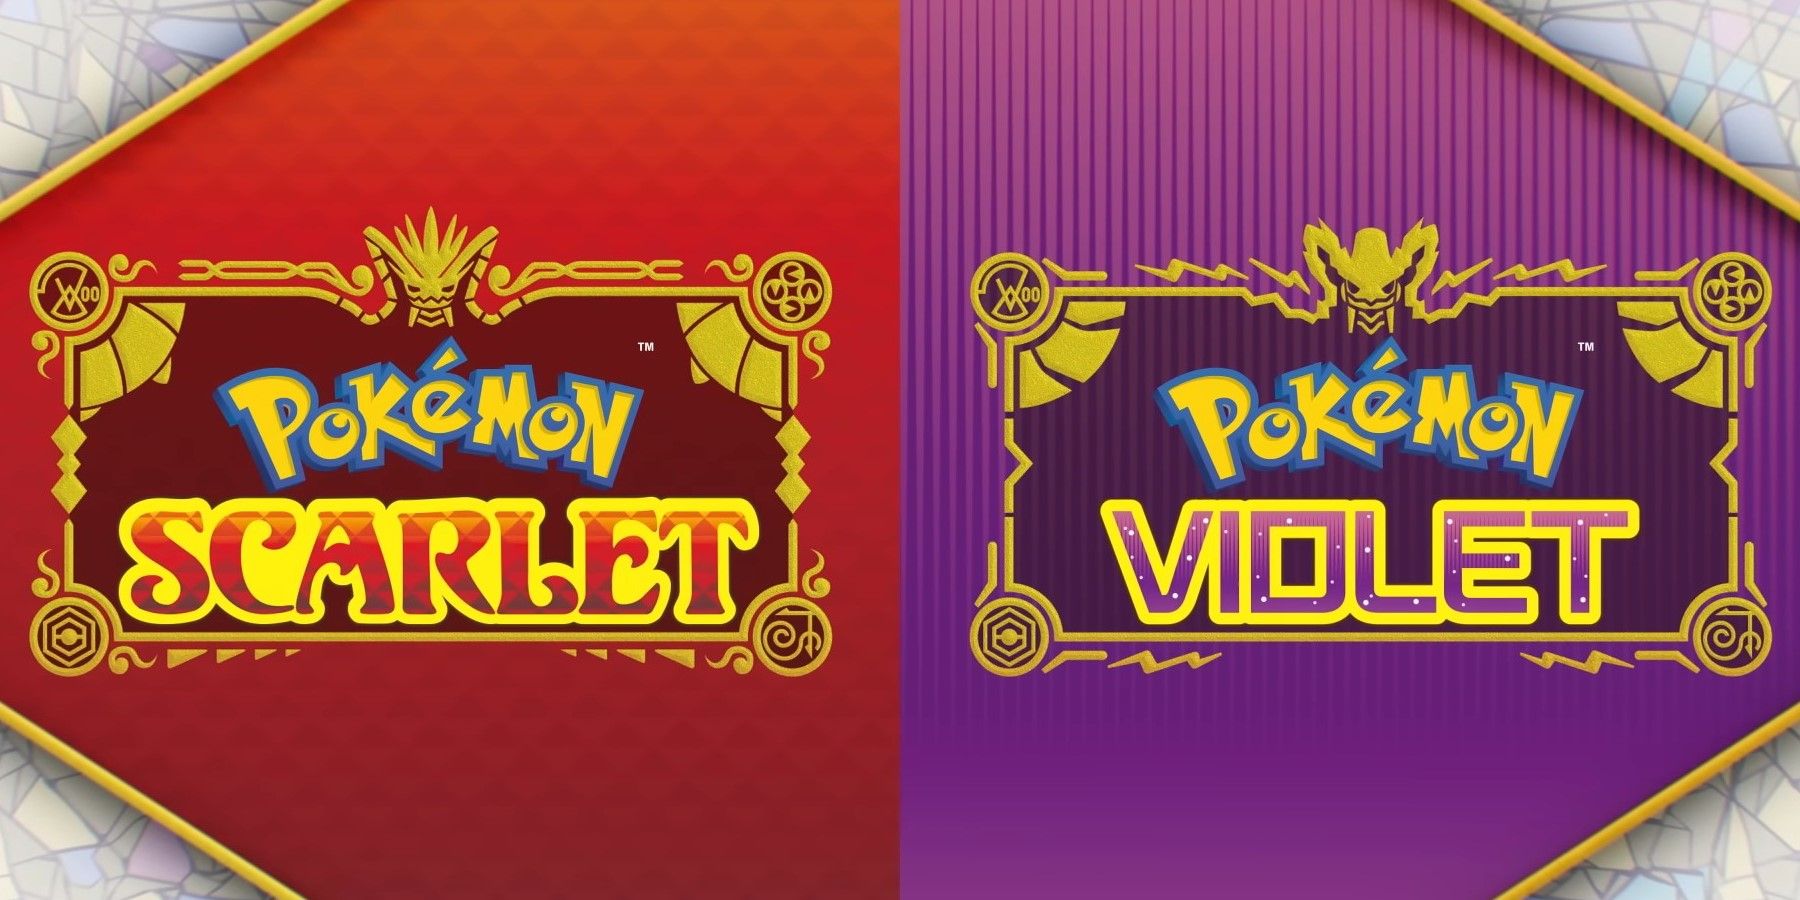 pokemon-scarlet-and-violet-logos-colored-background-patch-1-2-notes